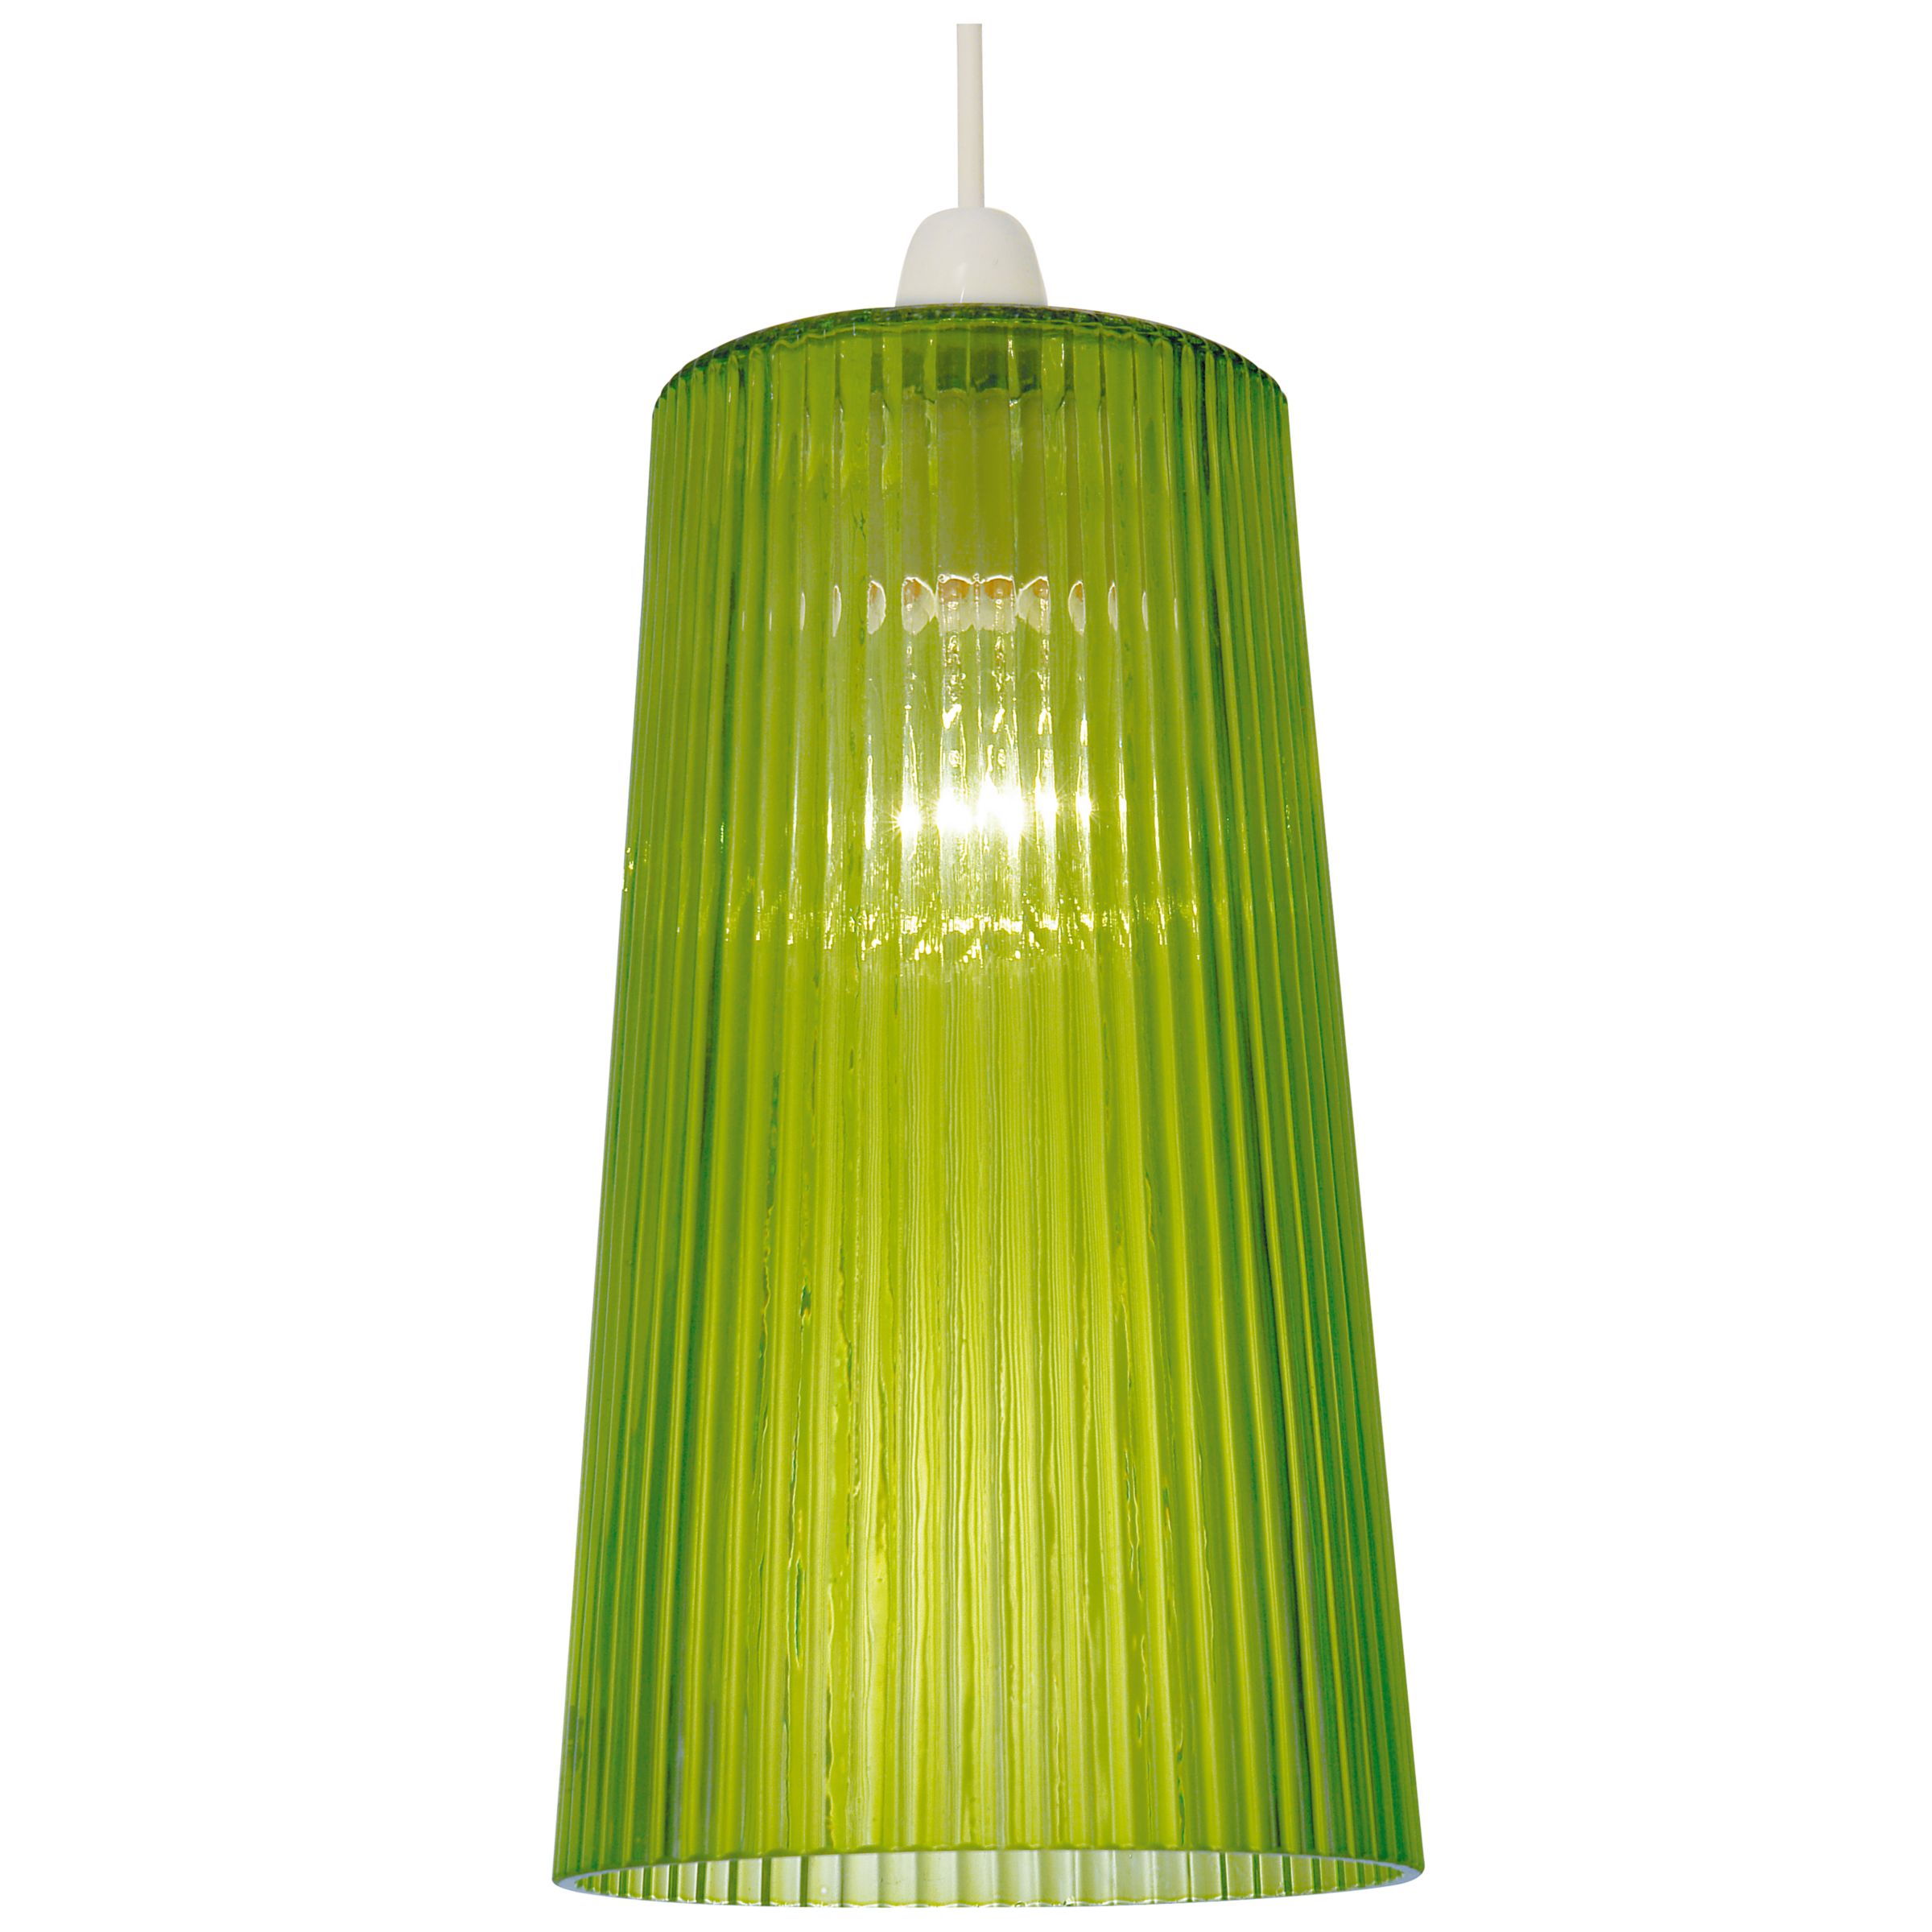 Ribbed Glass Ceiling Light, Green